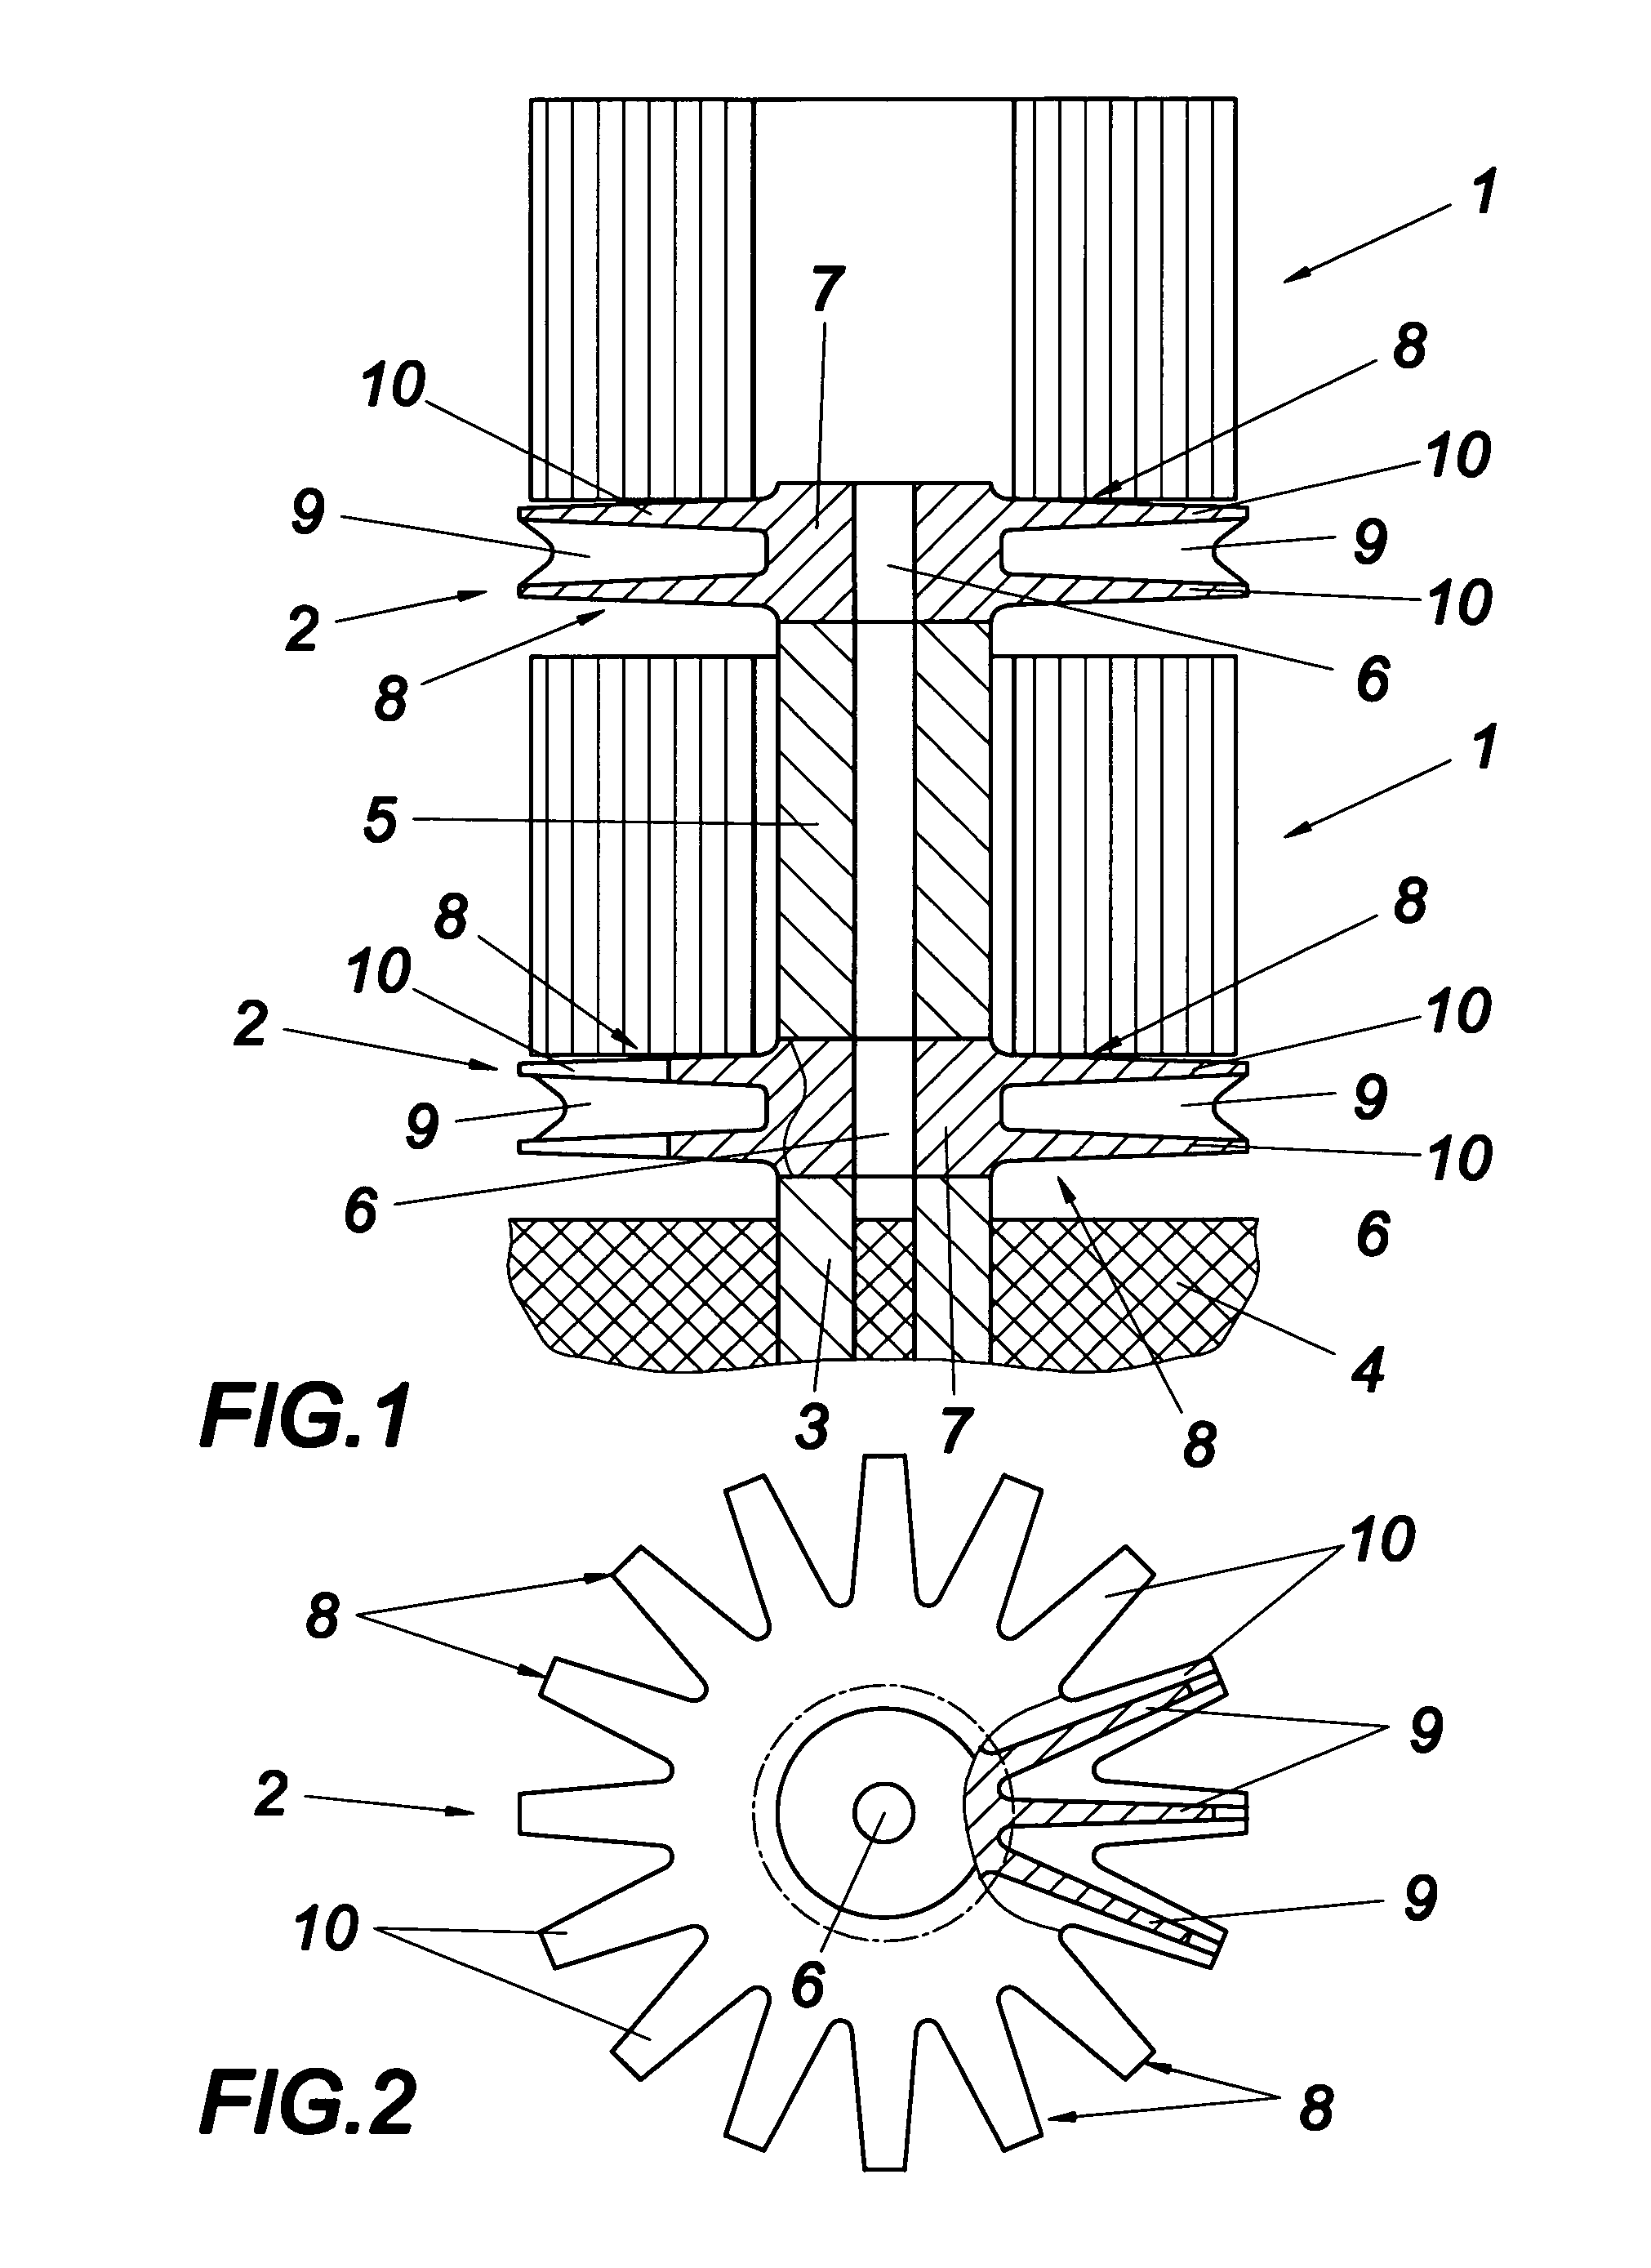 Apparatus for bracing of sheet-metal joints in a high-temperature annealing furnace